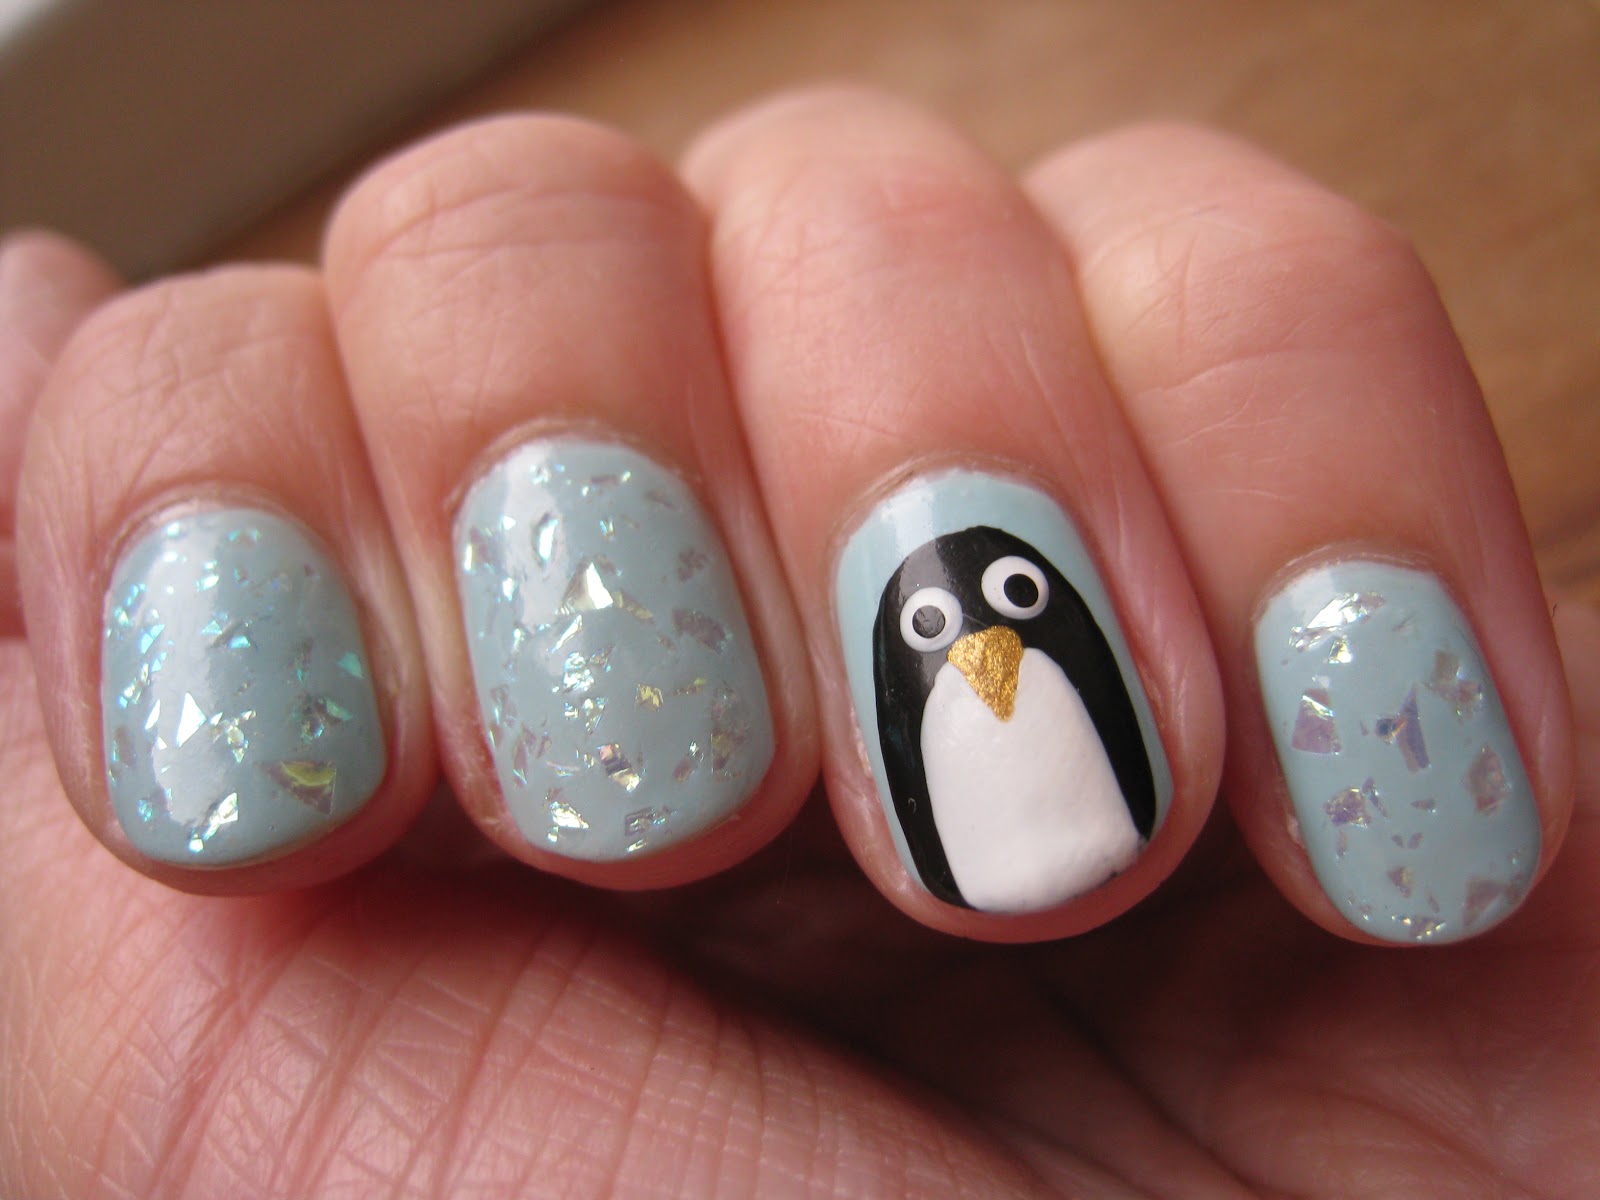 Naily perfect: Penguins and snowflakes!